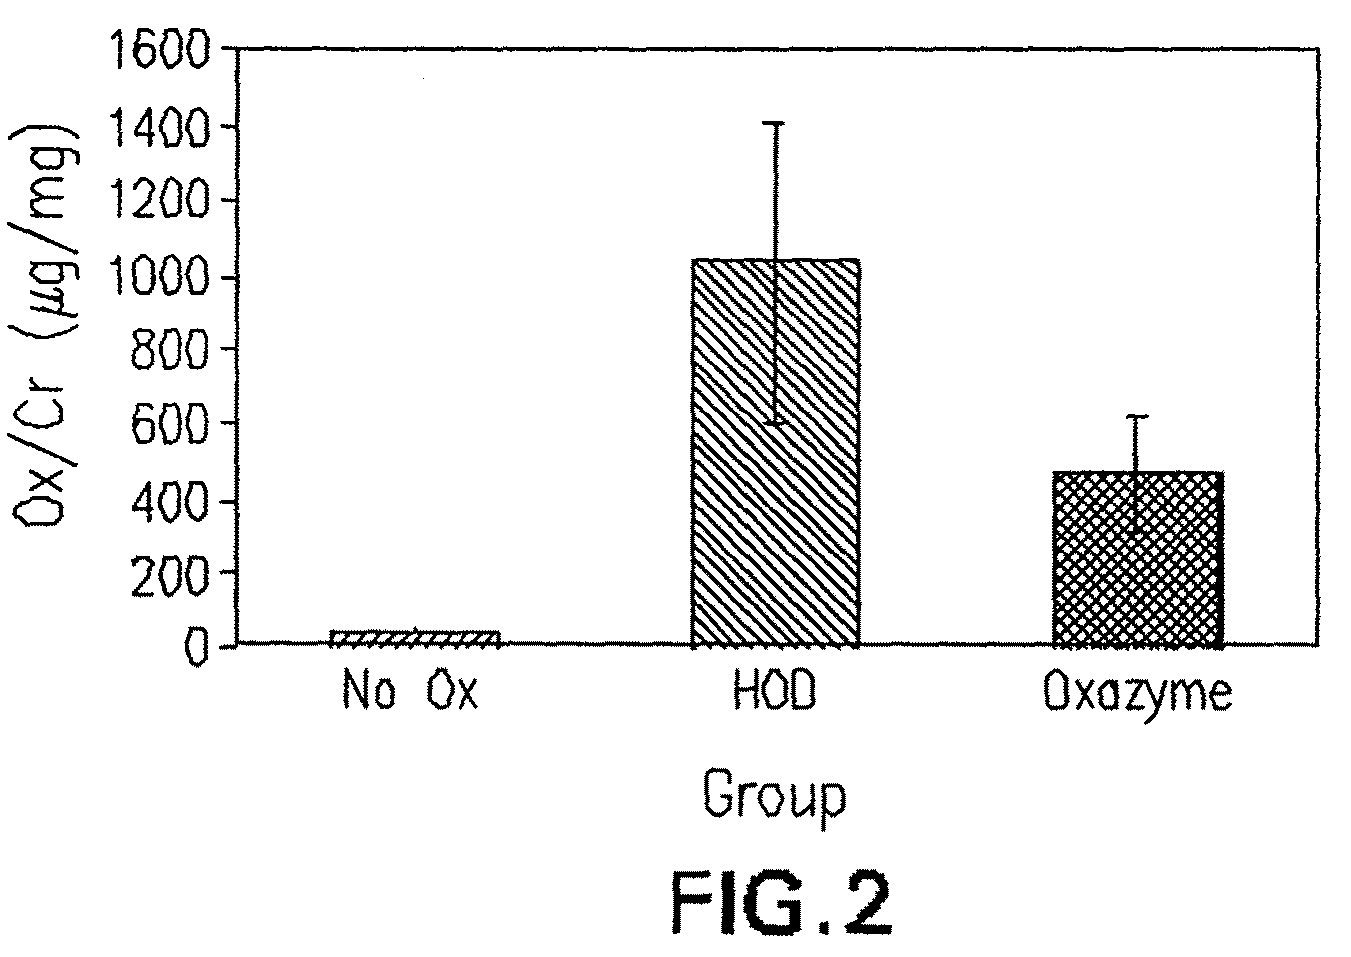 Purification and isolation of recombinant oxalate degrading enzymes and spray-dried particles containing oxalate degrading enzymes